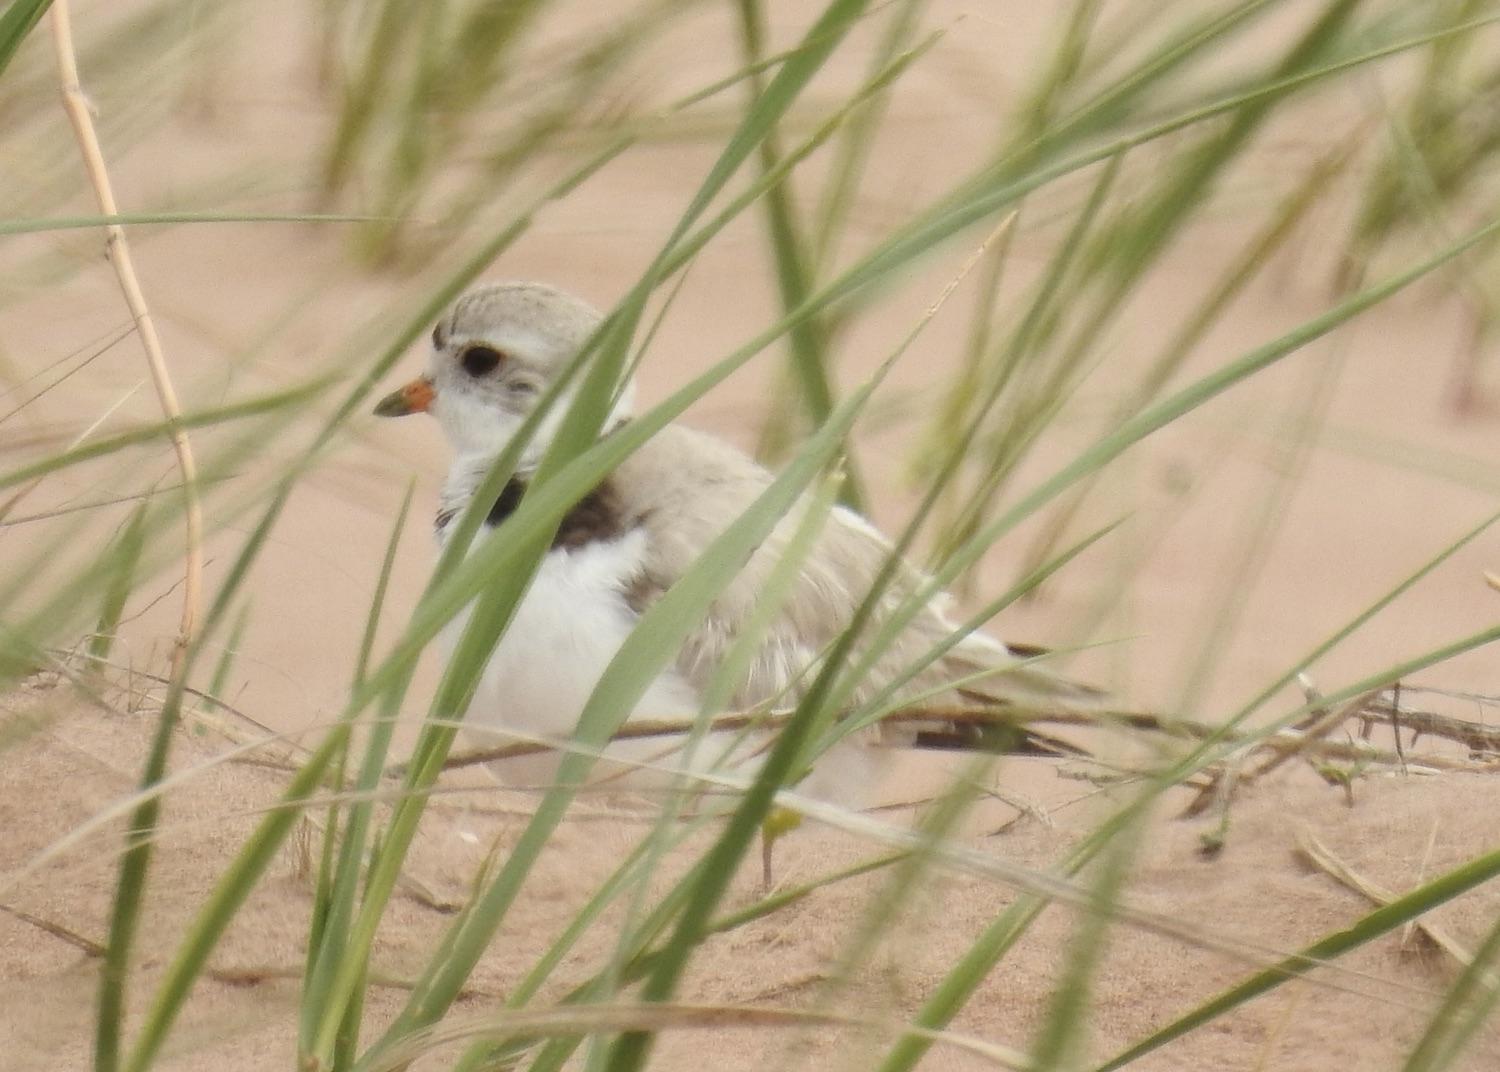 One of the nesting Piping Plovers photographed with a zoom lens on June 20.